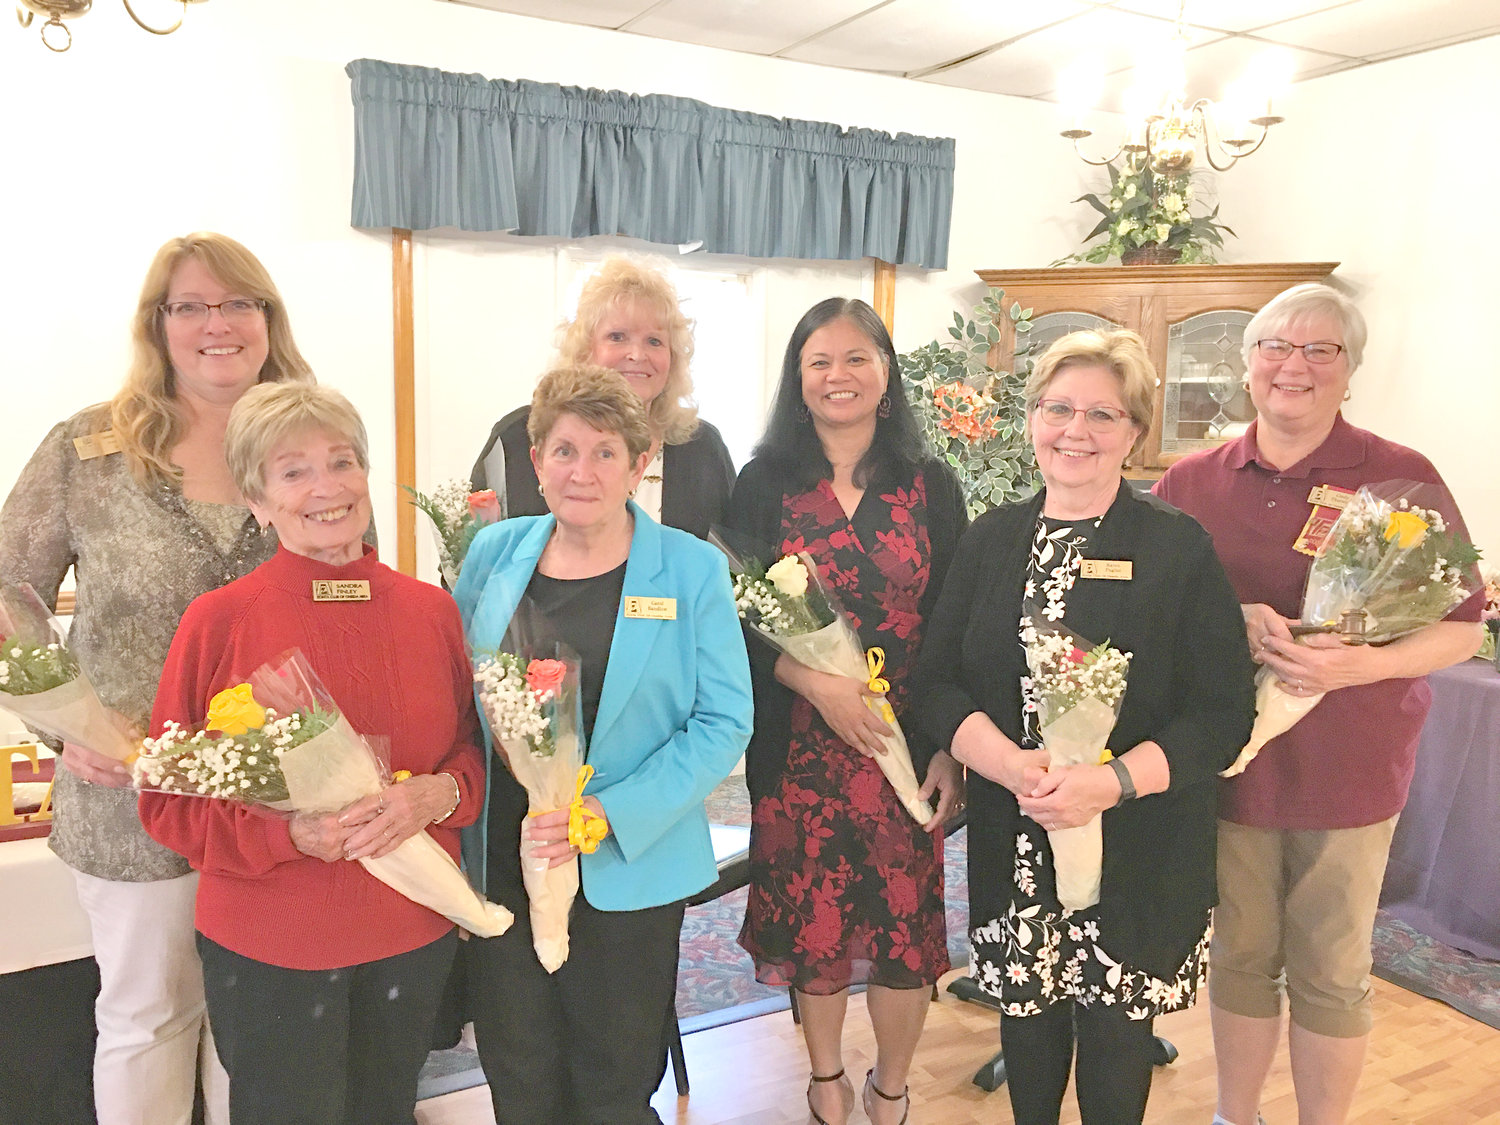 NEW OFFICERS — The Zonta Club of the Oneida Area recently installed club officers and directors for the new year. From left: Debbie Vecchio, D2 area director; Sandy Finley, historian; Carol Bandlow, recording secretary; Sue Pulverenti,  corresponding secretary; Maria Schmitt, treasurer; Karen Puglisi, Vice President; Cindy Thurston, director. Not shown are Jean Halpern, director; and Fay Eastwood, chapter  president.